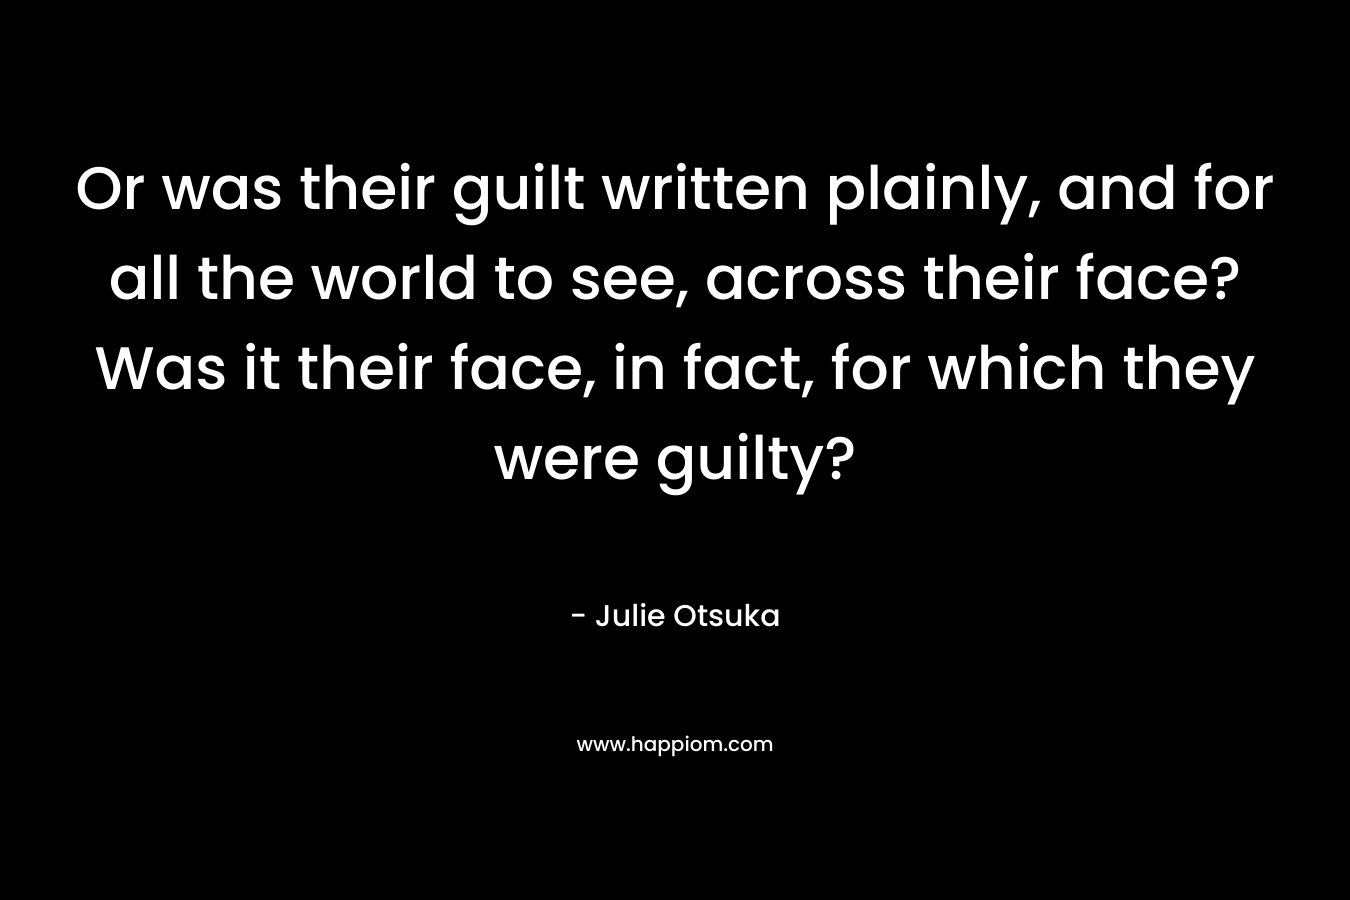 Or was their guilt written plainly, and for all the world to see, across their face? Was it their face, in fact, for which they were guilty? – Julie Otsuka